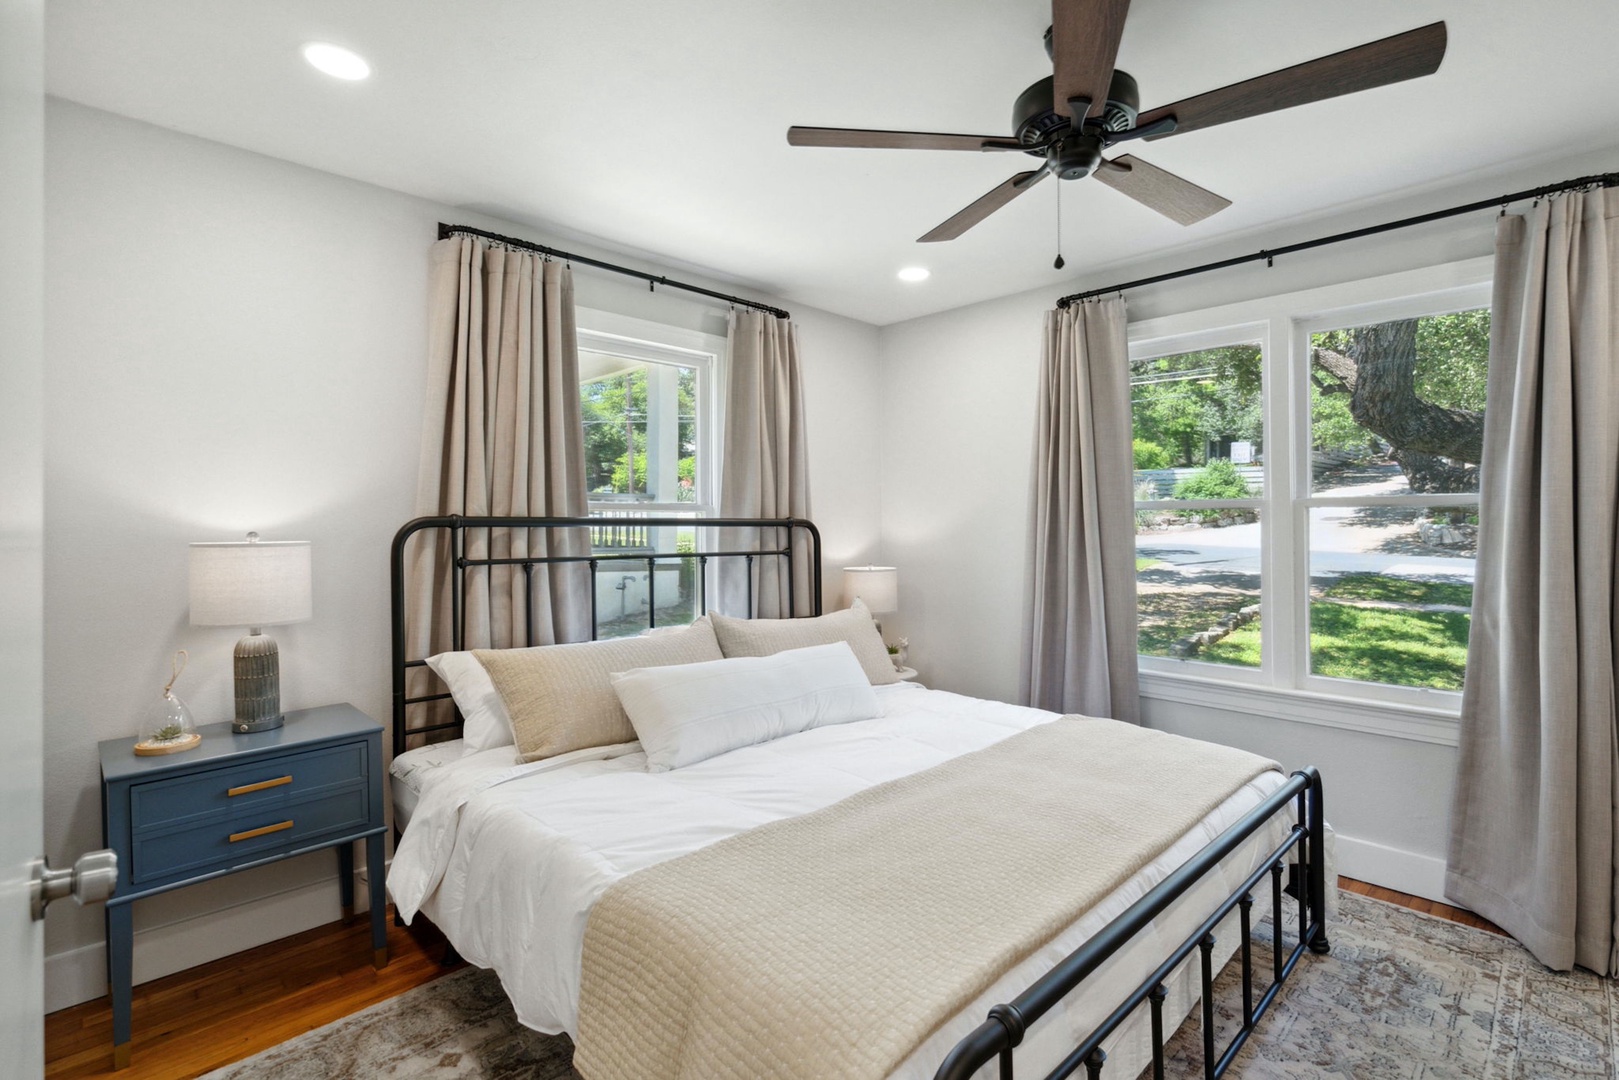 The second bedroom boasts a plush king-sized bed & Smart TV